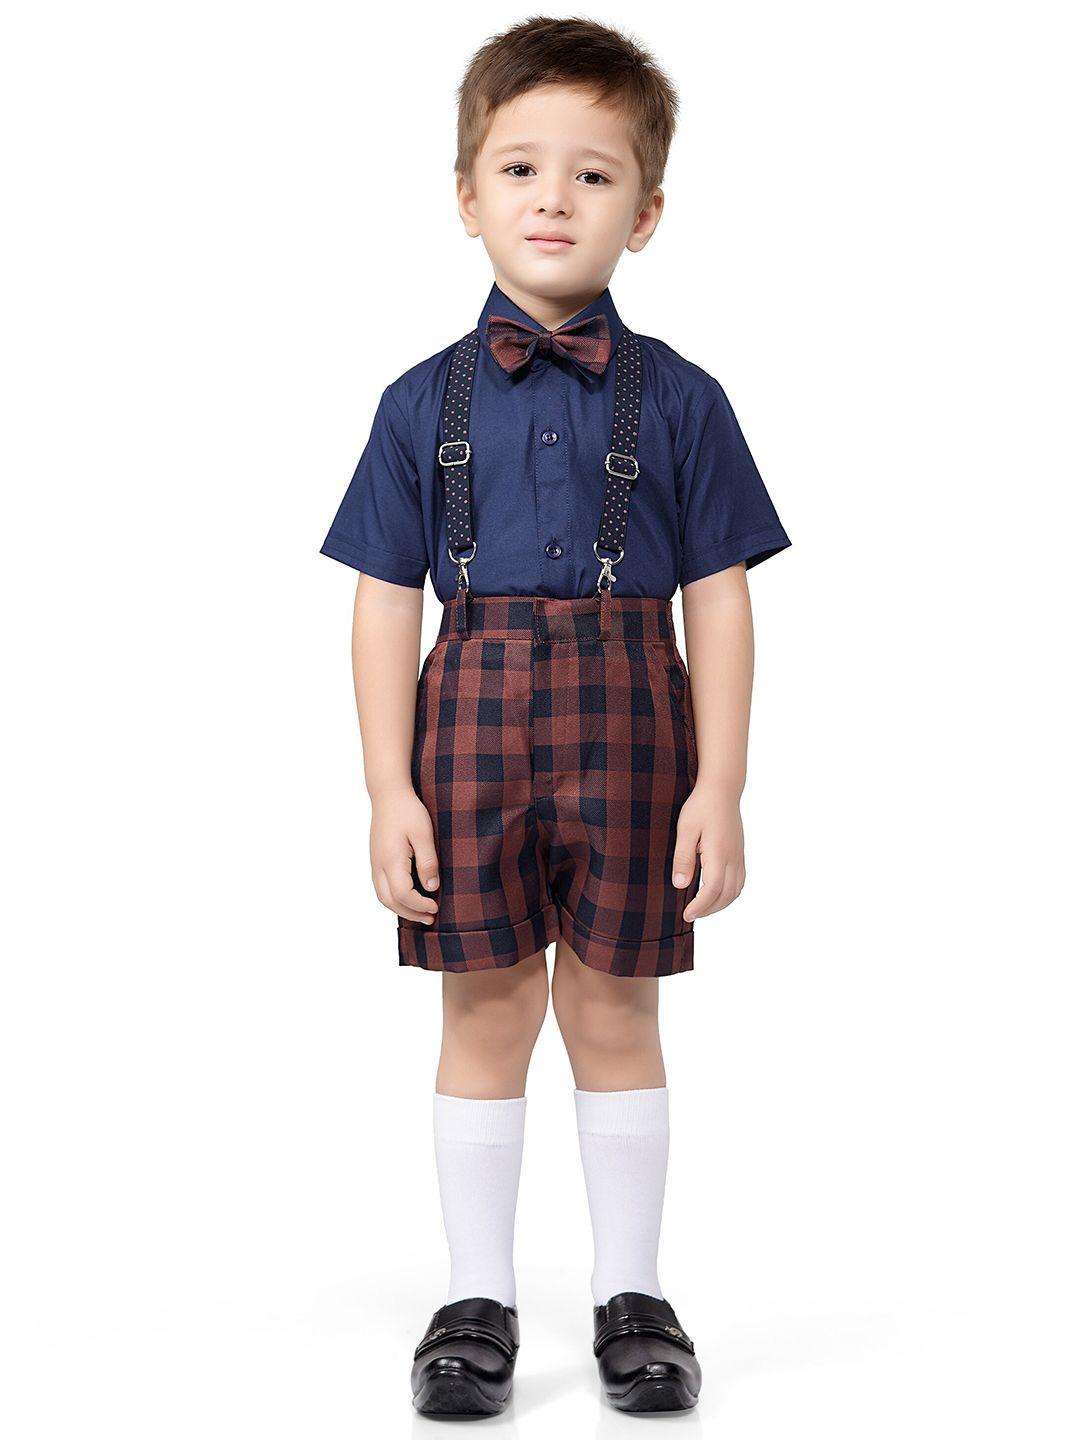 jeetethnics boys navy blue & brown shirt with checked shorts with bow & suspenders set